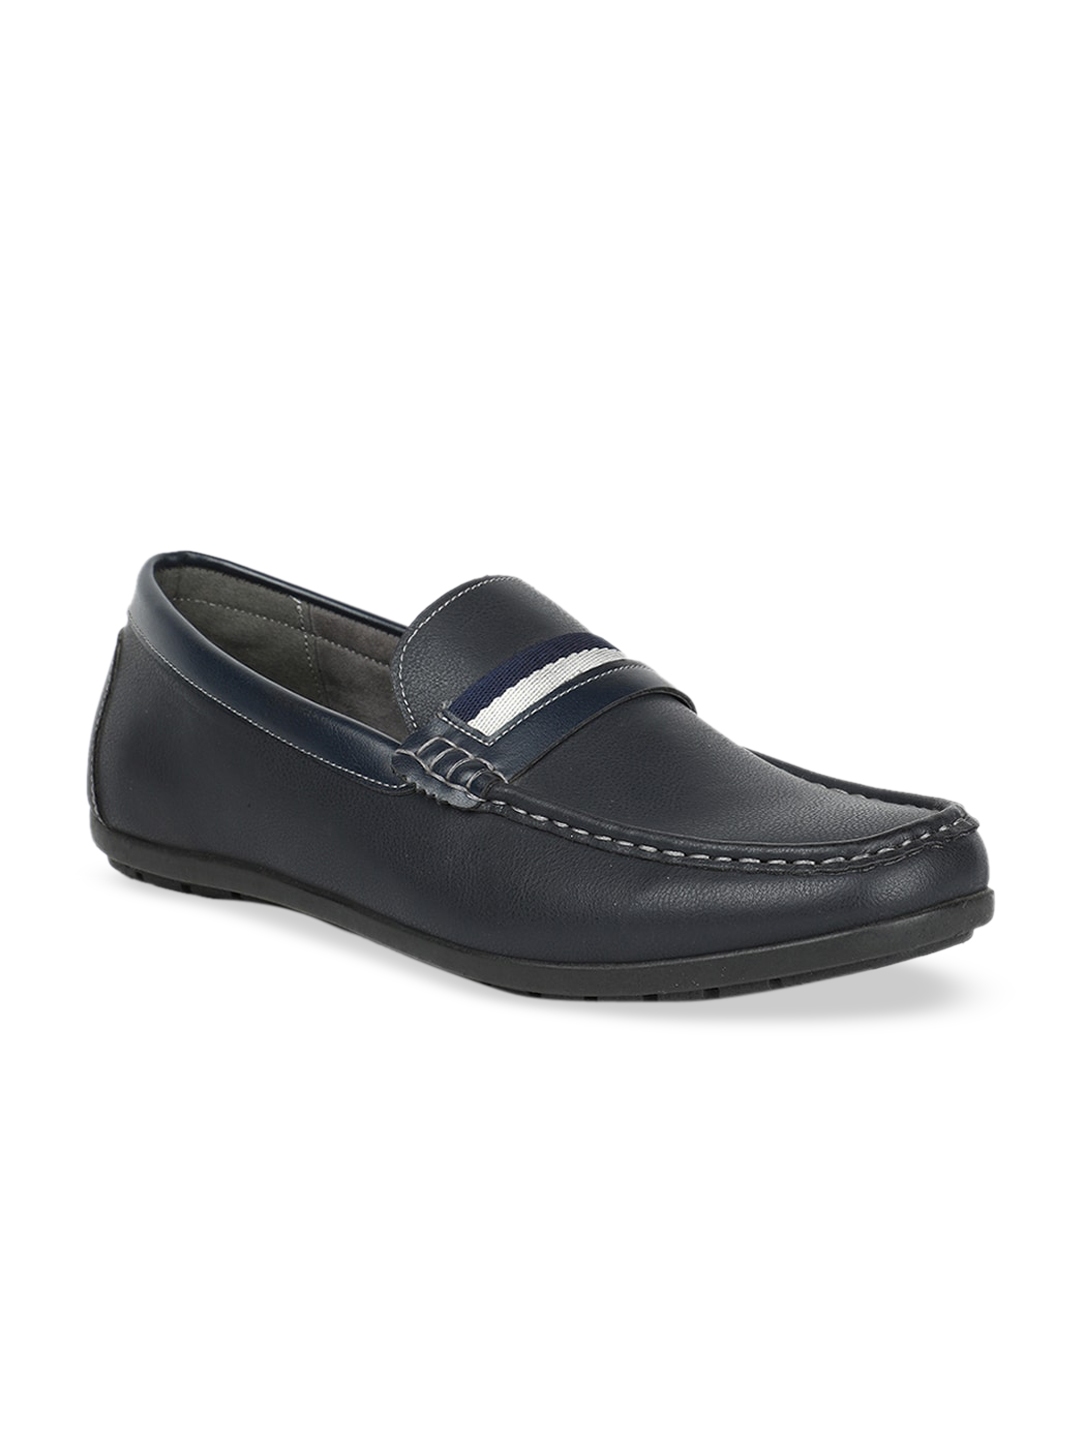 Buy Bata Men Black Loafers - Casual Shoes for Men 12746574 | Myntra